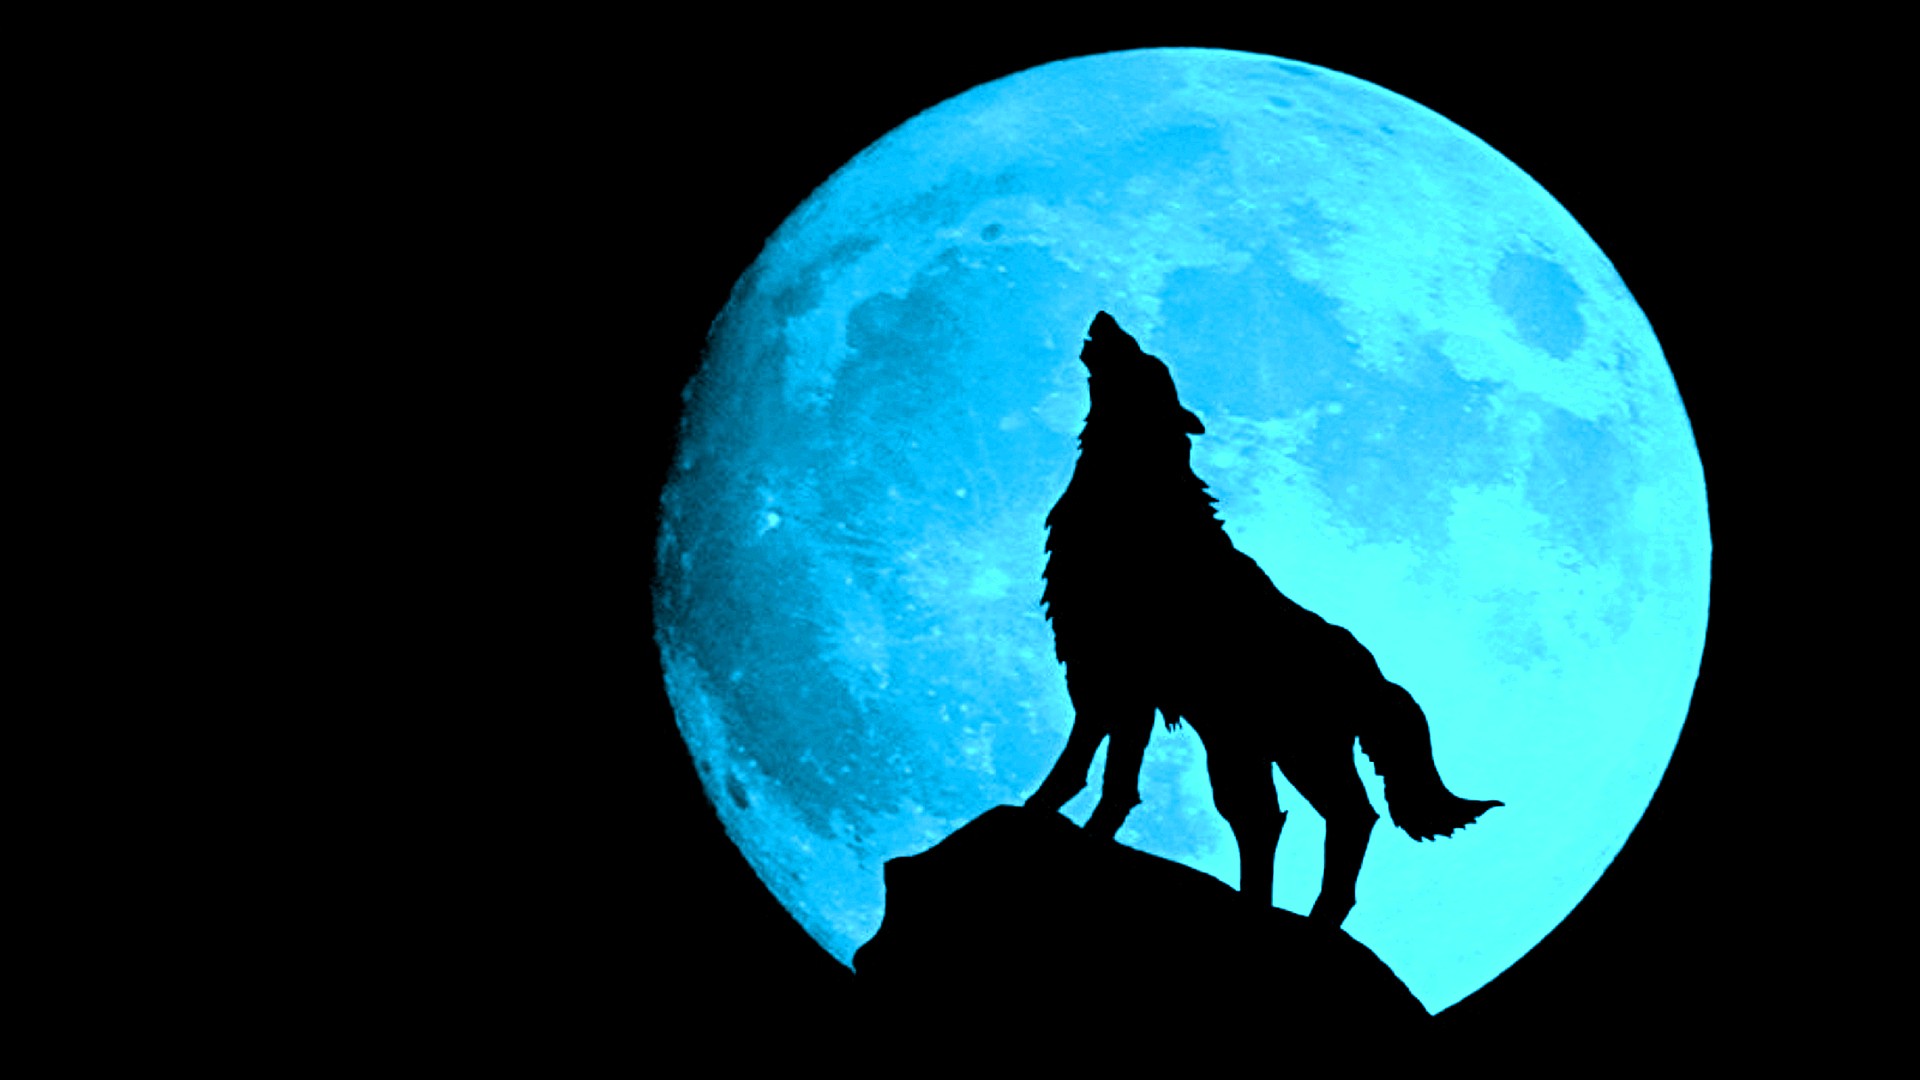 Cool Wolf Desktop Wallpaper with high-resolution 1920x1080 pixel. You can use this wallpaper for your Windows and Mac OS computers as well as your Android and iPhone smartphones